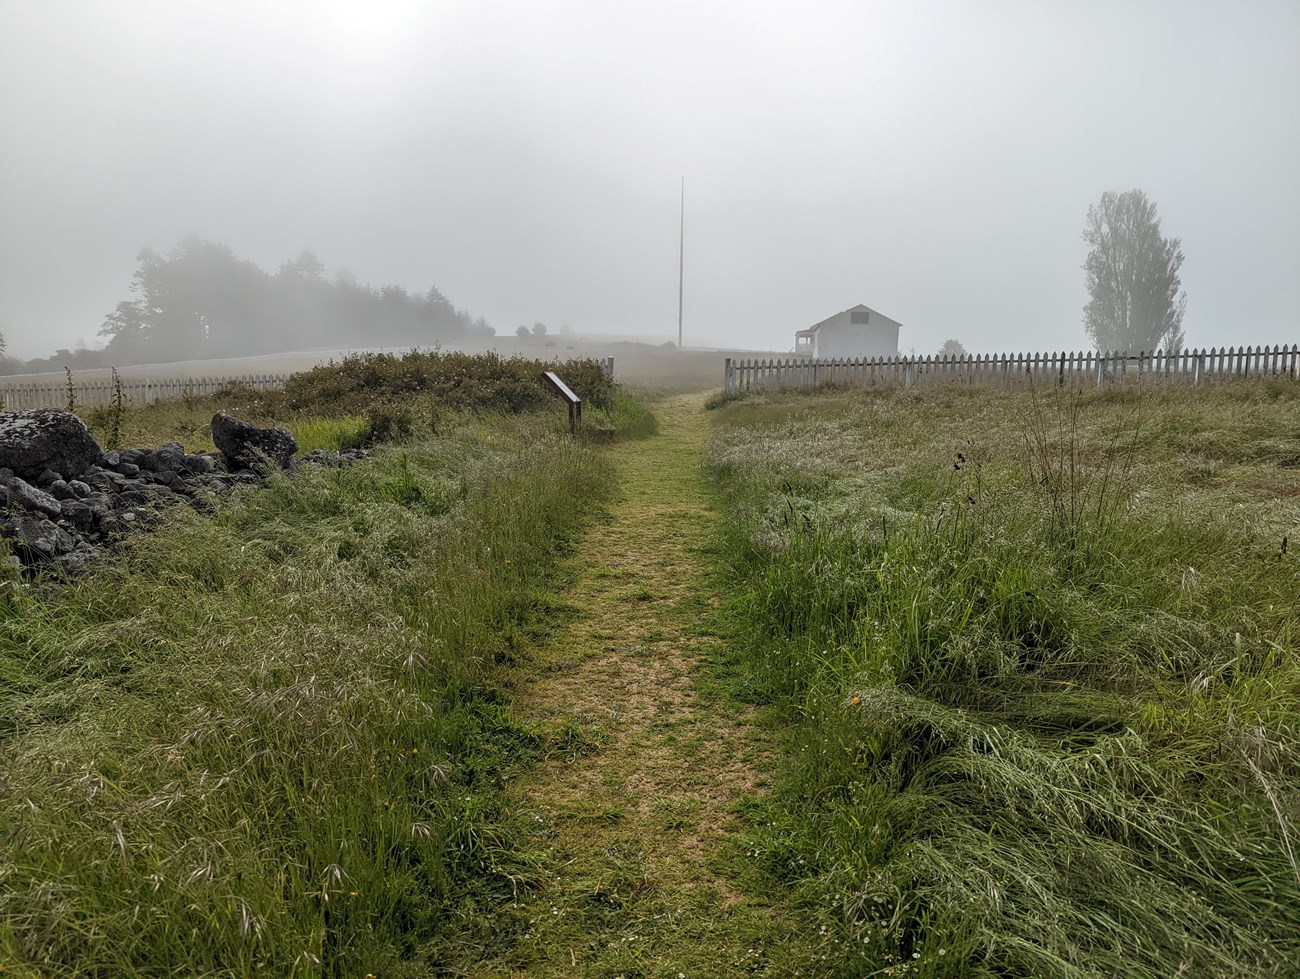 grassy trail in fog. there's a fence, building, and trees in the background